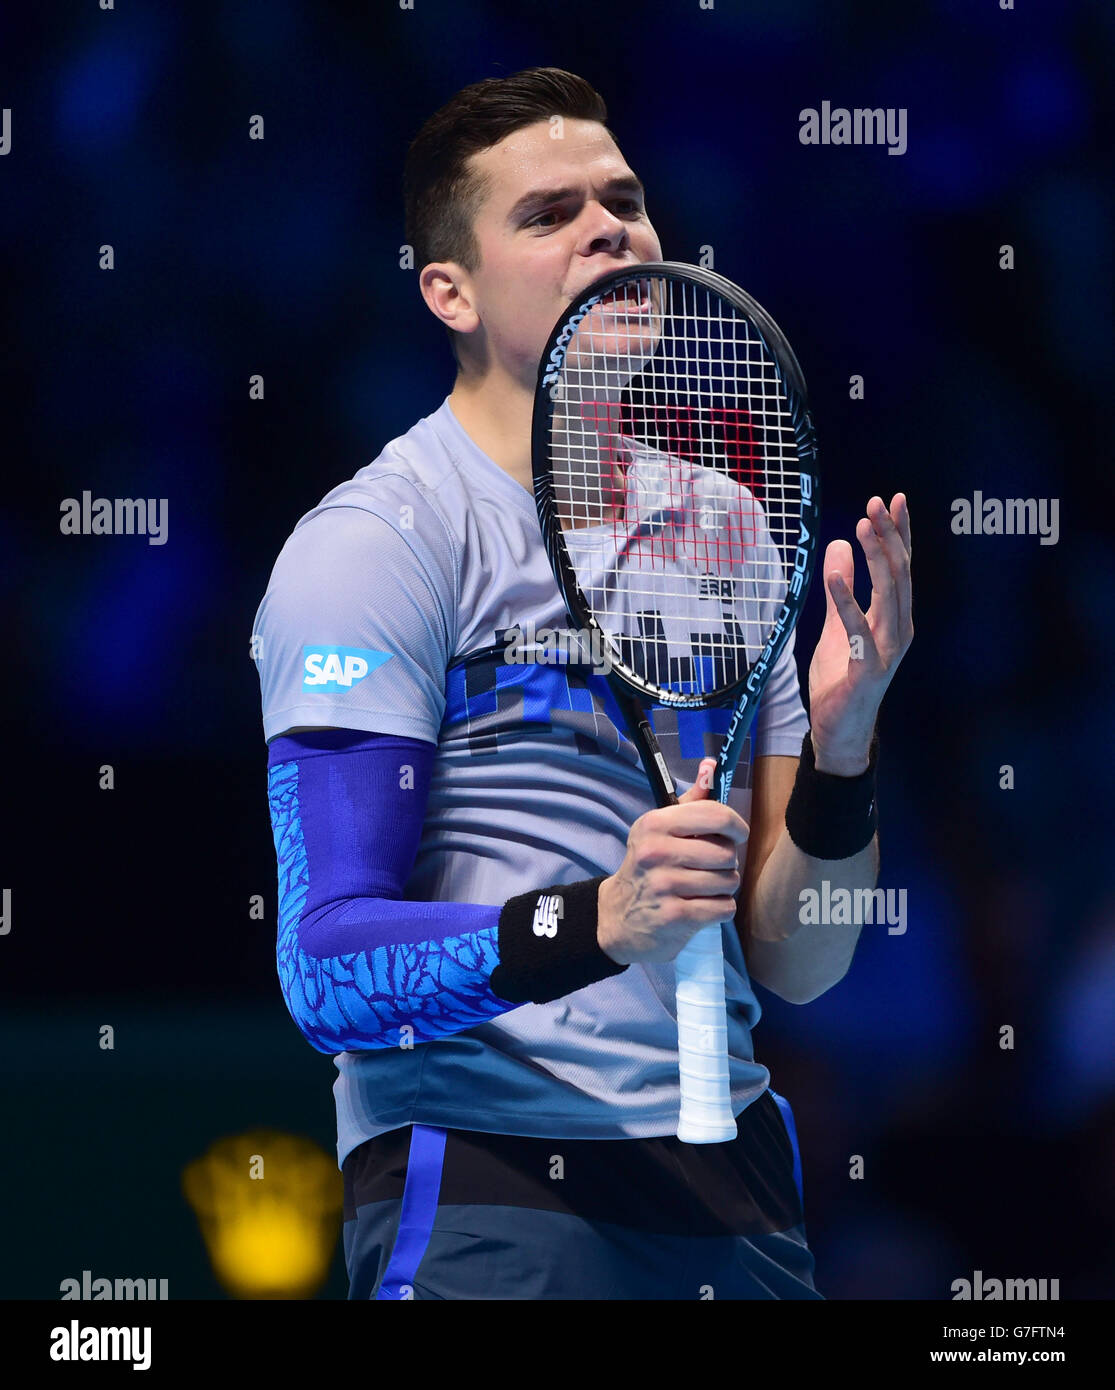 Canada's Milos Raonic during the Barclays ATP World Tour Finals at The O2 Arena, London. PRESS ASSOCIATION Photo. Picture date: Tuesday November 11, 2014. See PA story TENNIS London. Photo credit should read Adam Davy/PA Wire. Stock Photo